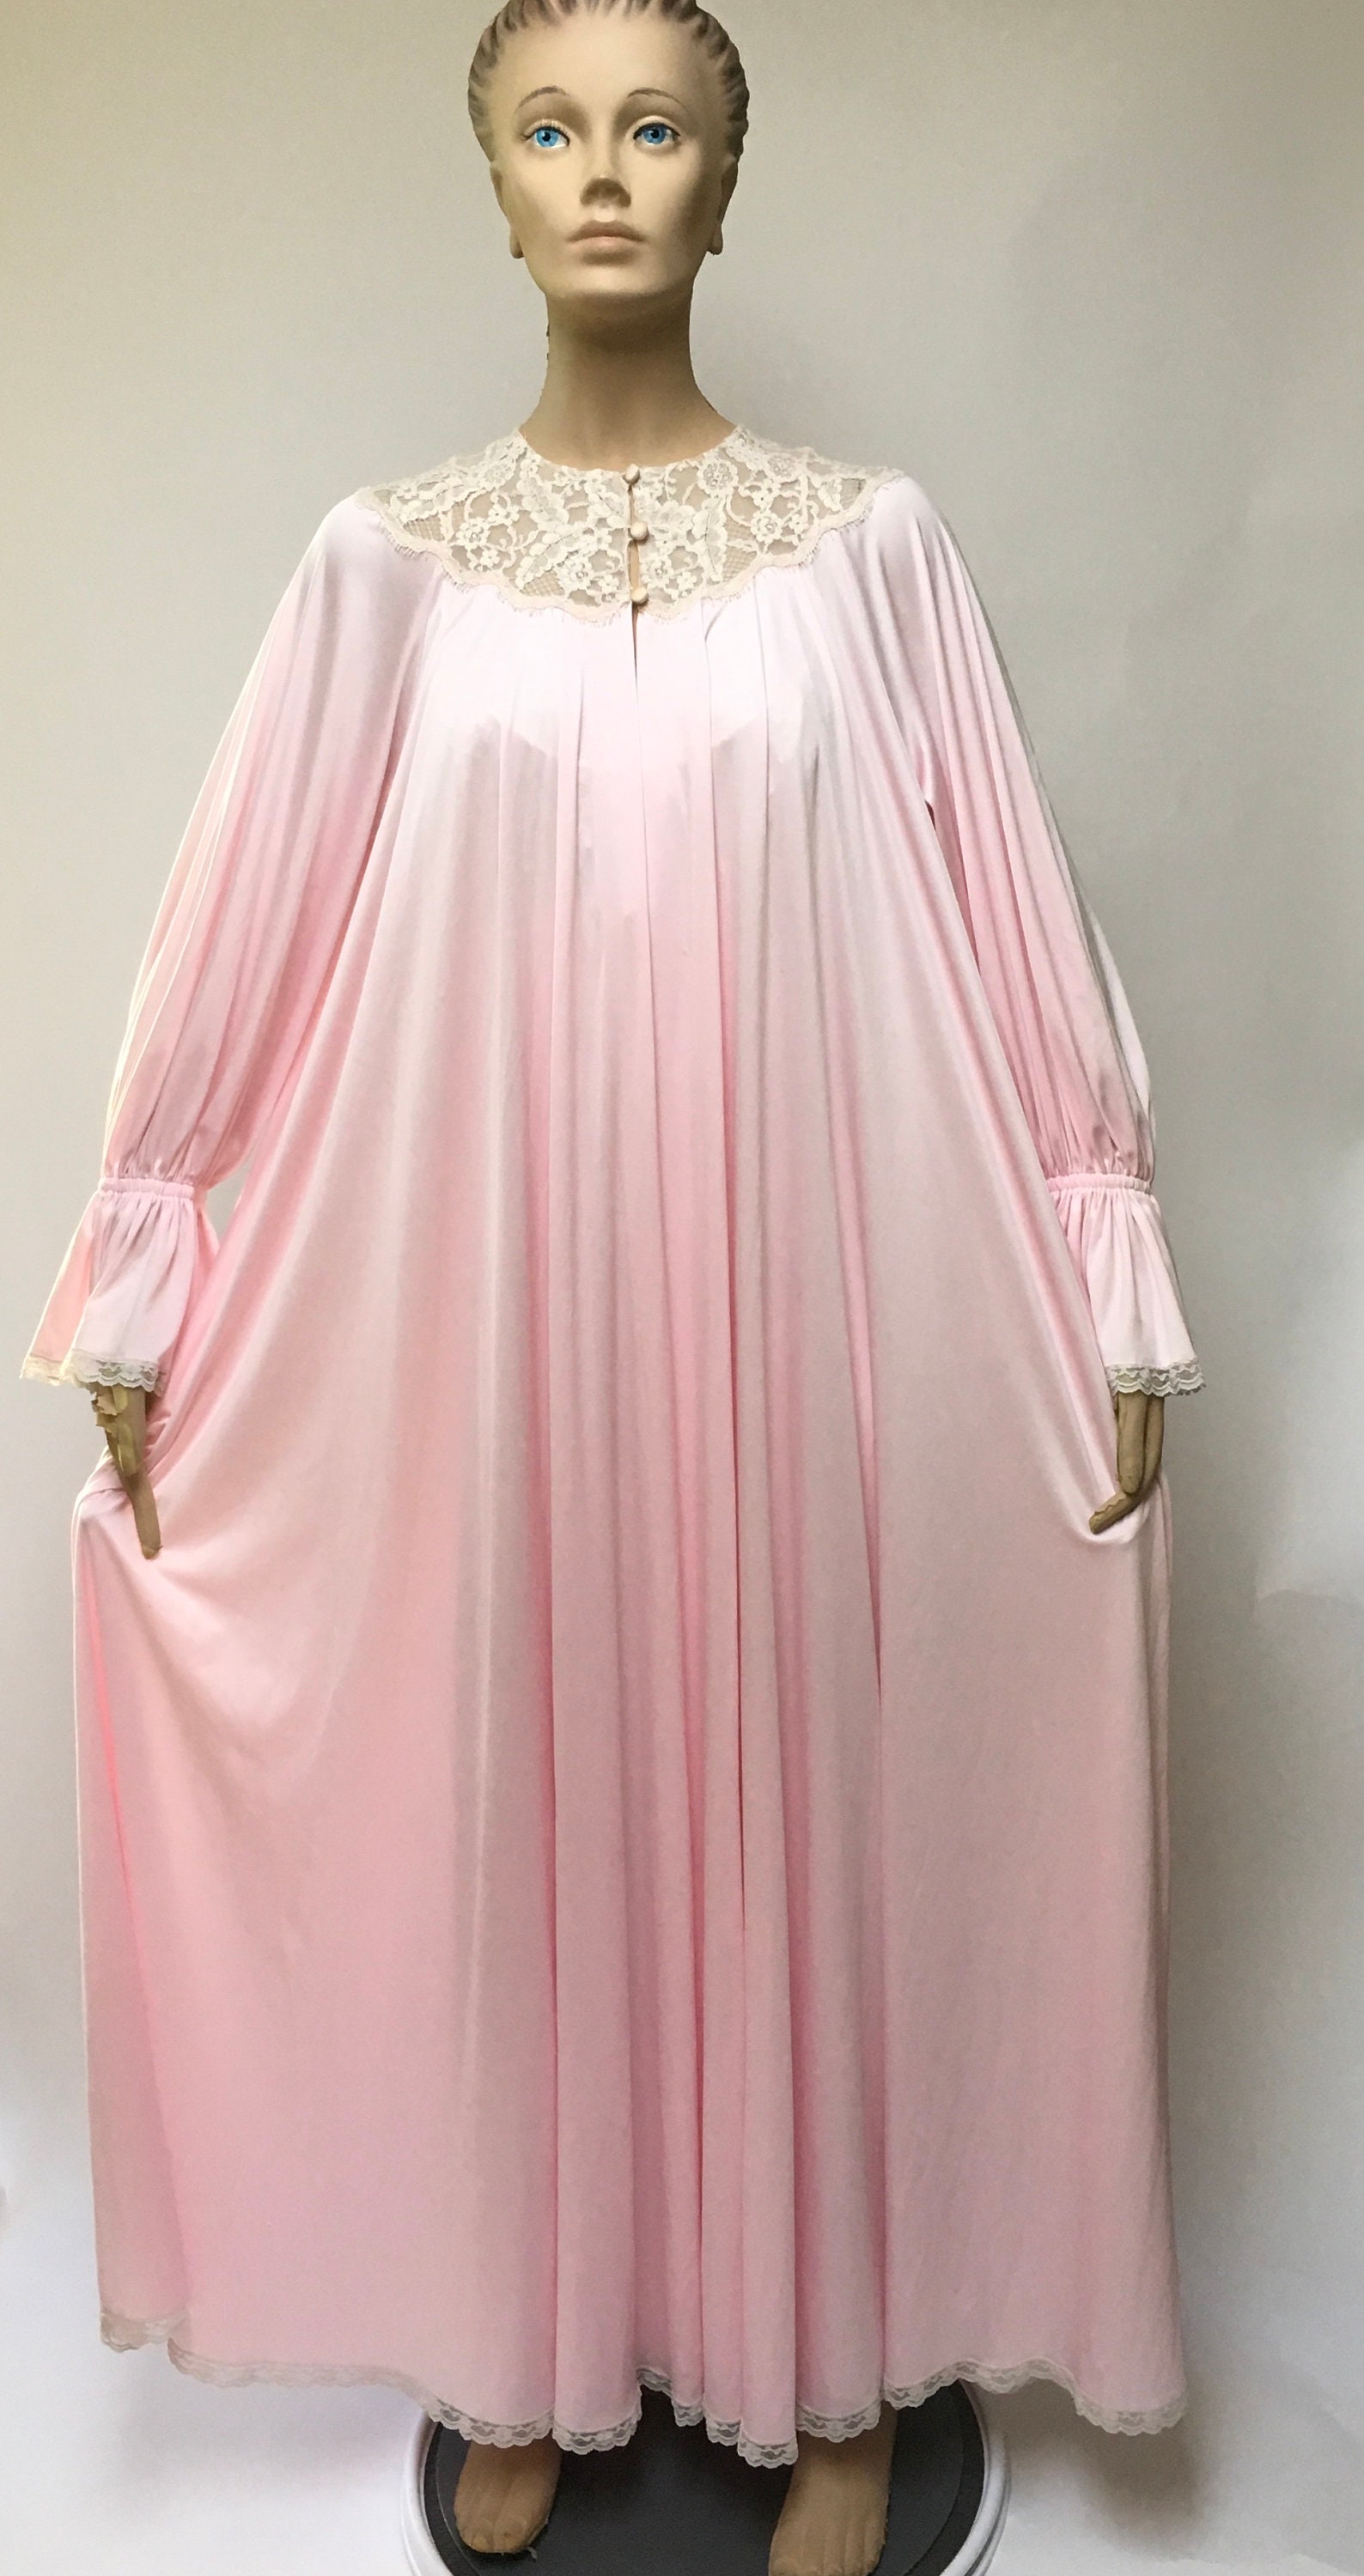 Lucie Ann Pink Nightgown Robe Set Claire Sandra Beverly Hills | Etsy